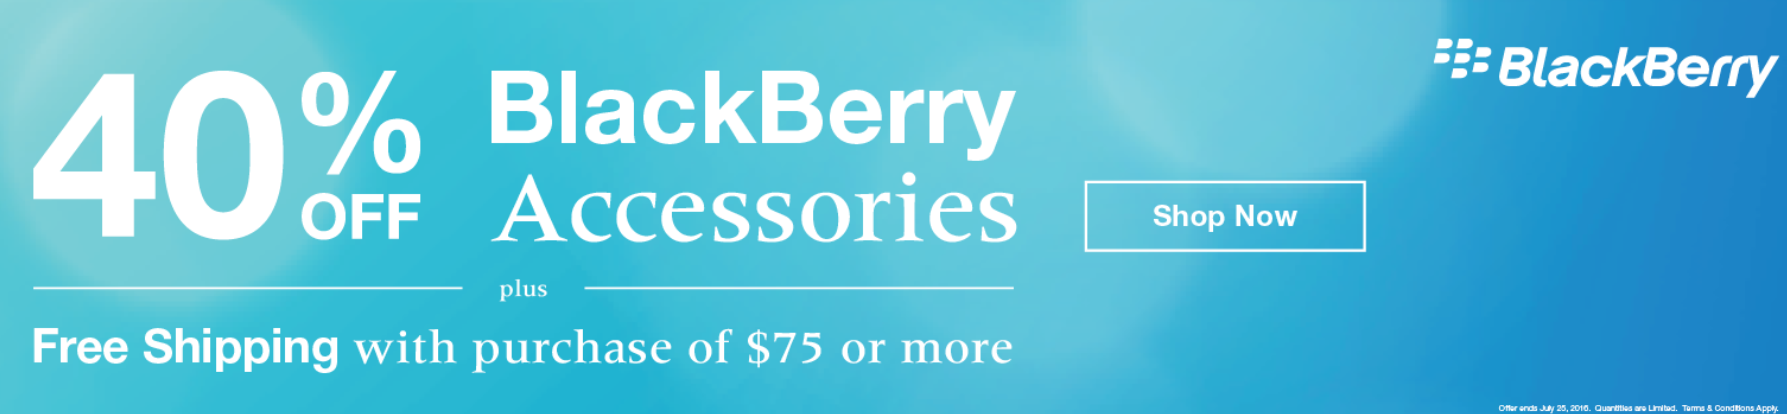 Take 40% off the price of BlackBerry accessories from the manufacturer's on-line store - Take 40% off BlackBerry accessories from now through Monday July 25th